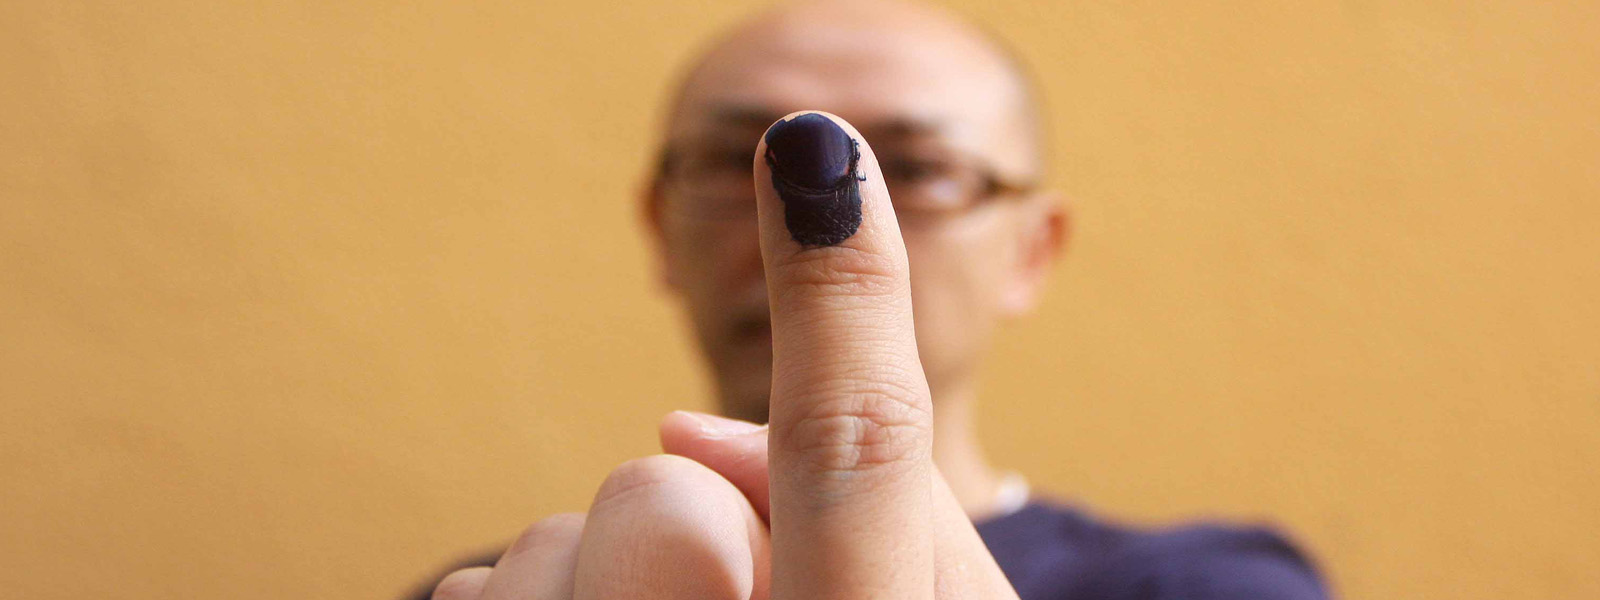 Voters coloured fingers bring on election blues